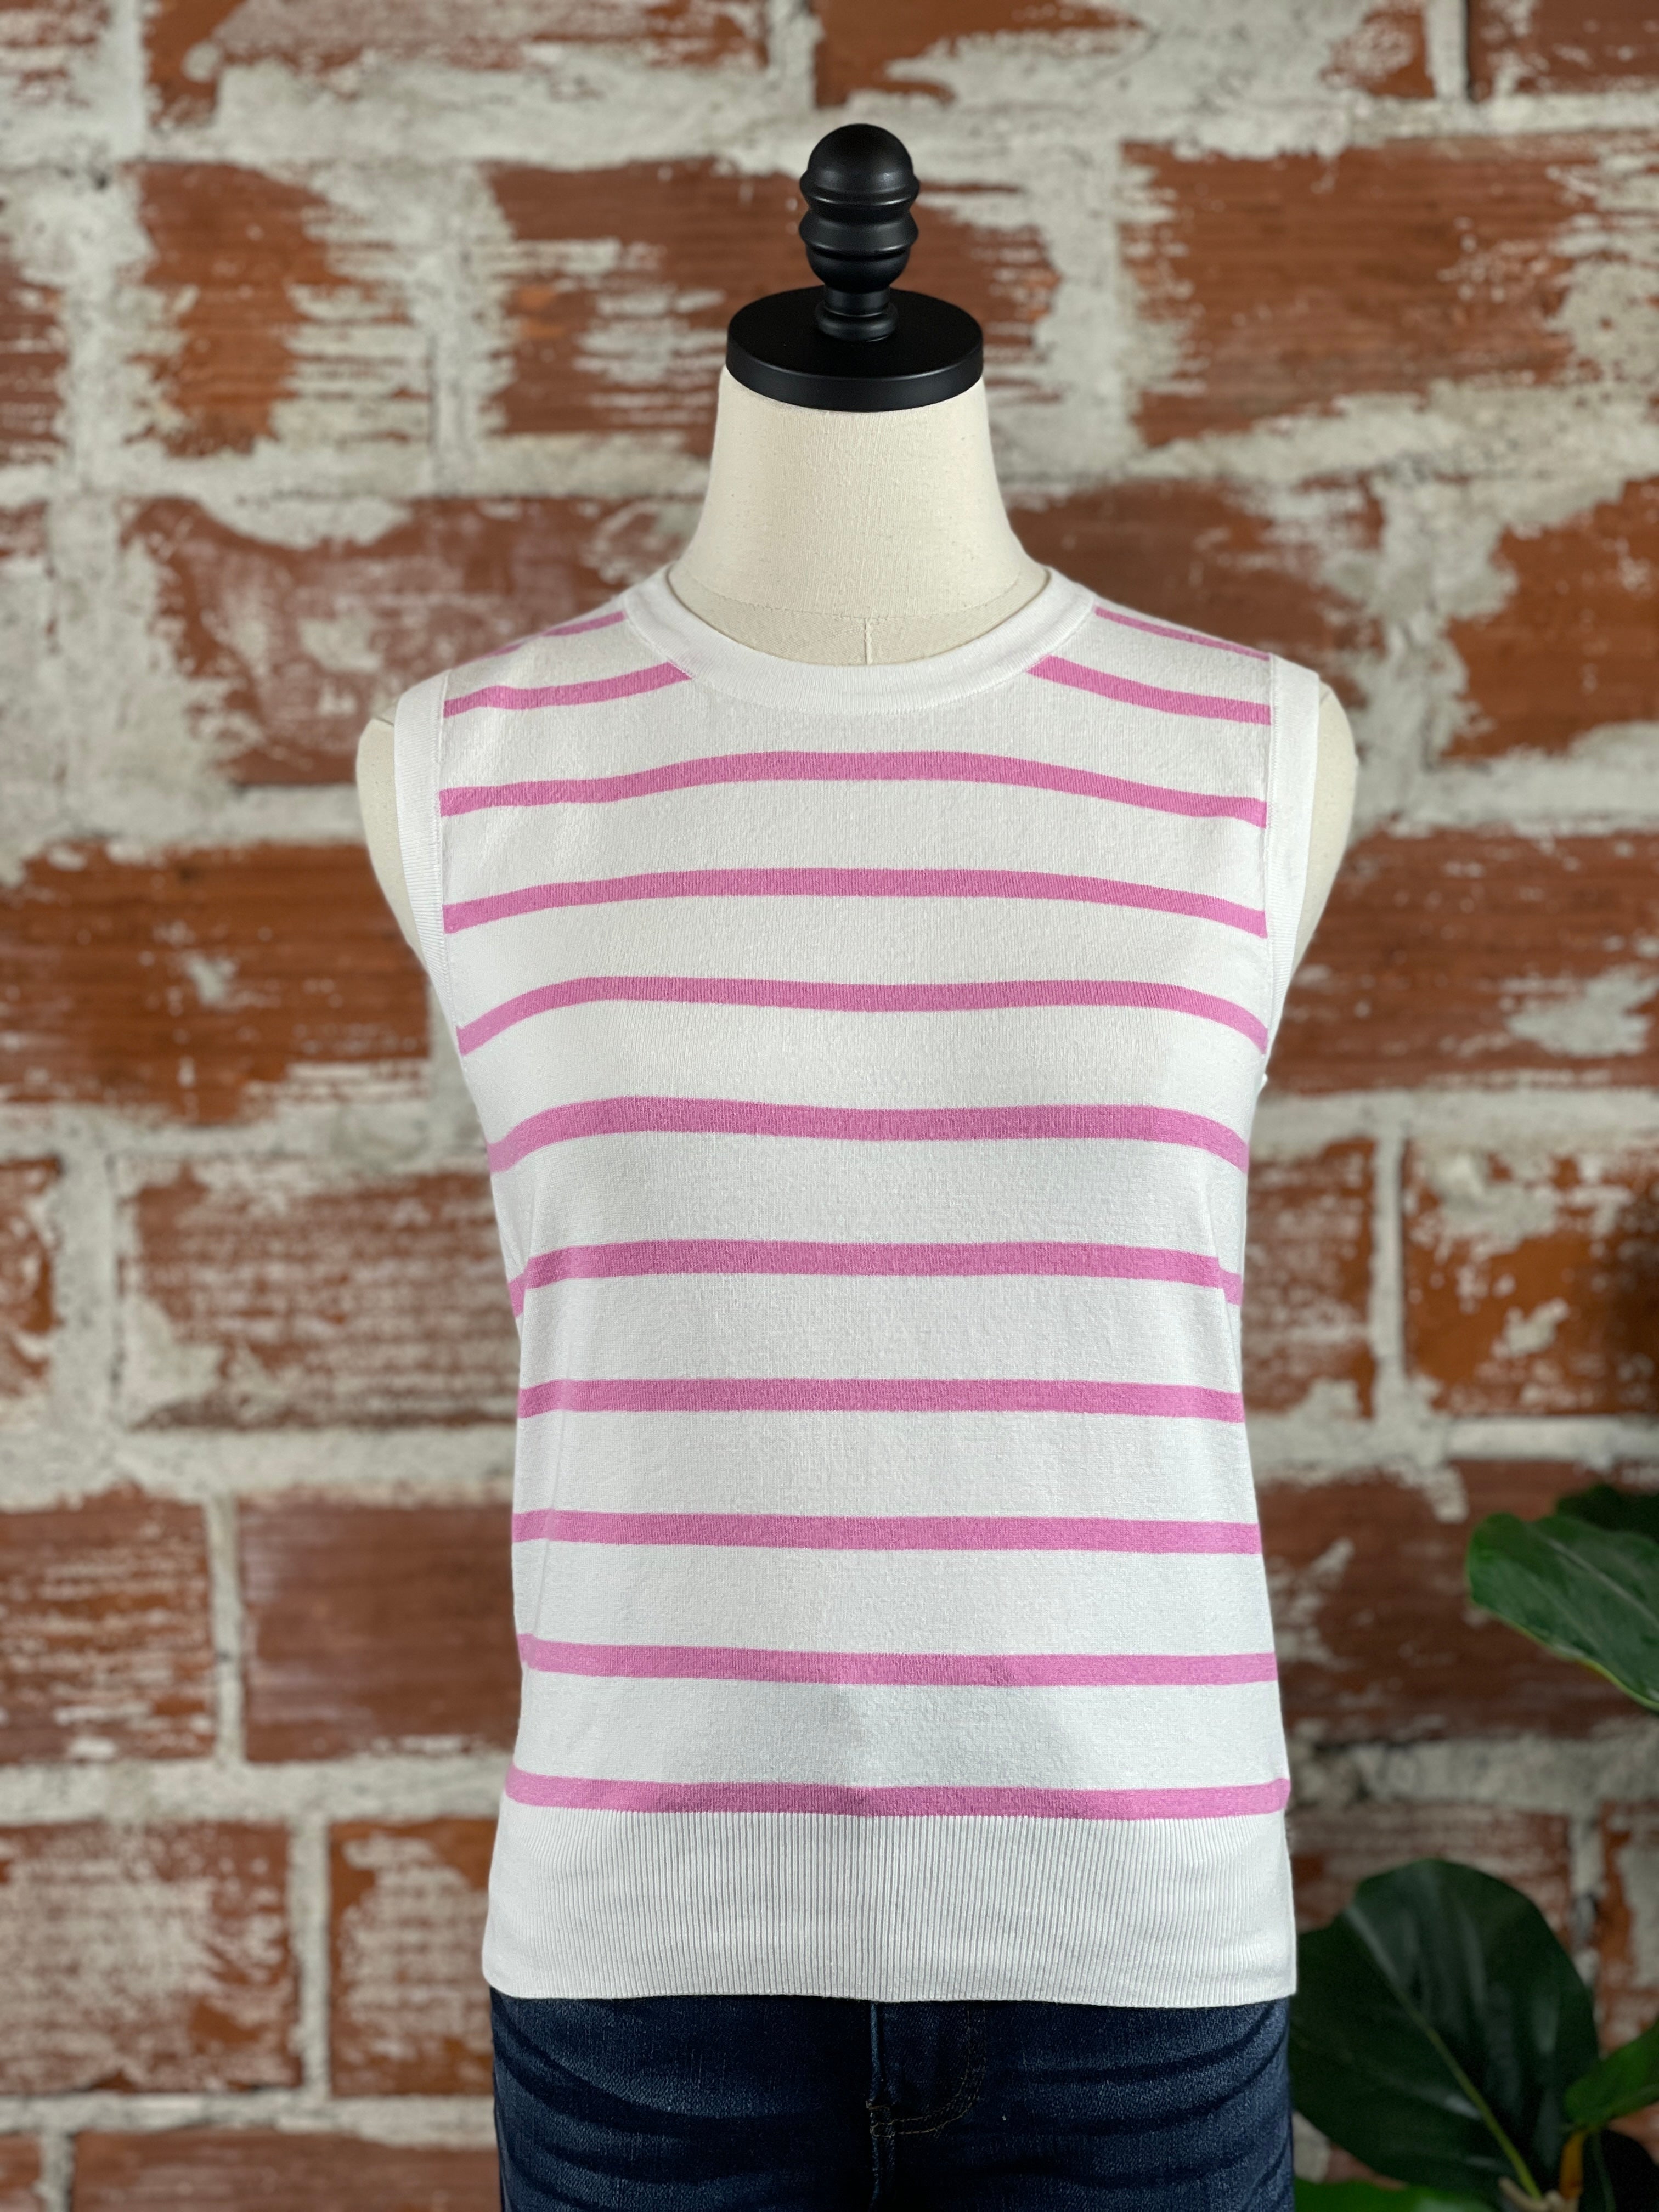 Sami Sleeveless Top in Pink & White-132 - Sweaters S/S (Jan - June)-Little Bird Boutique